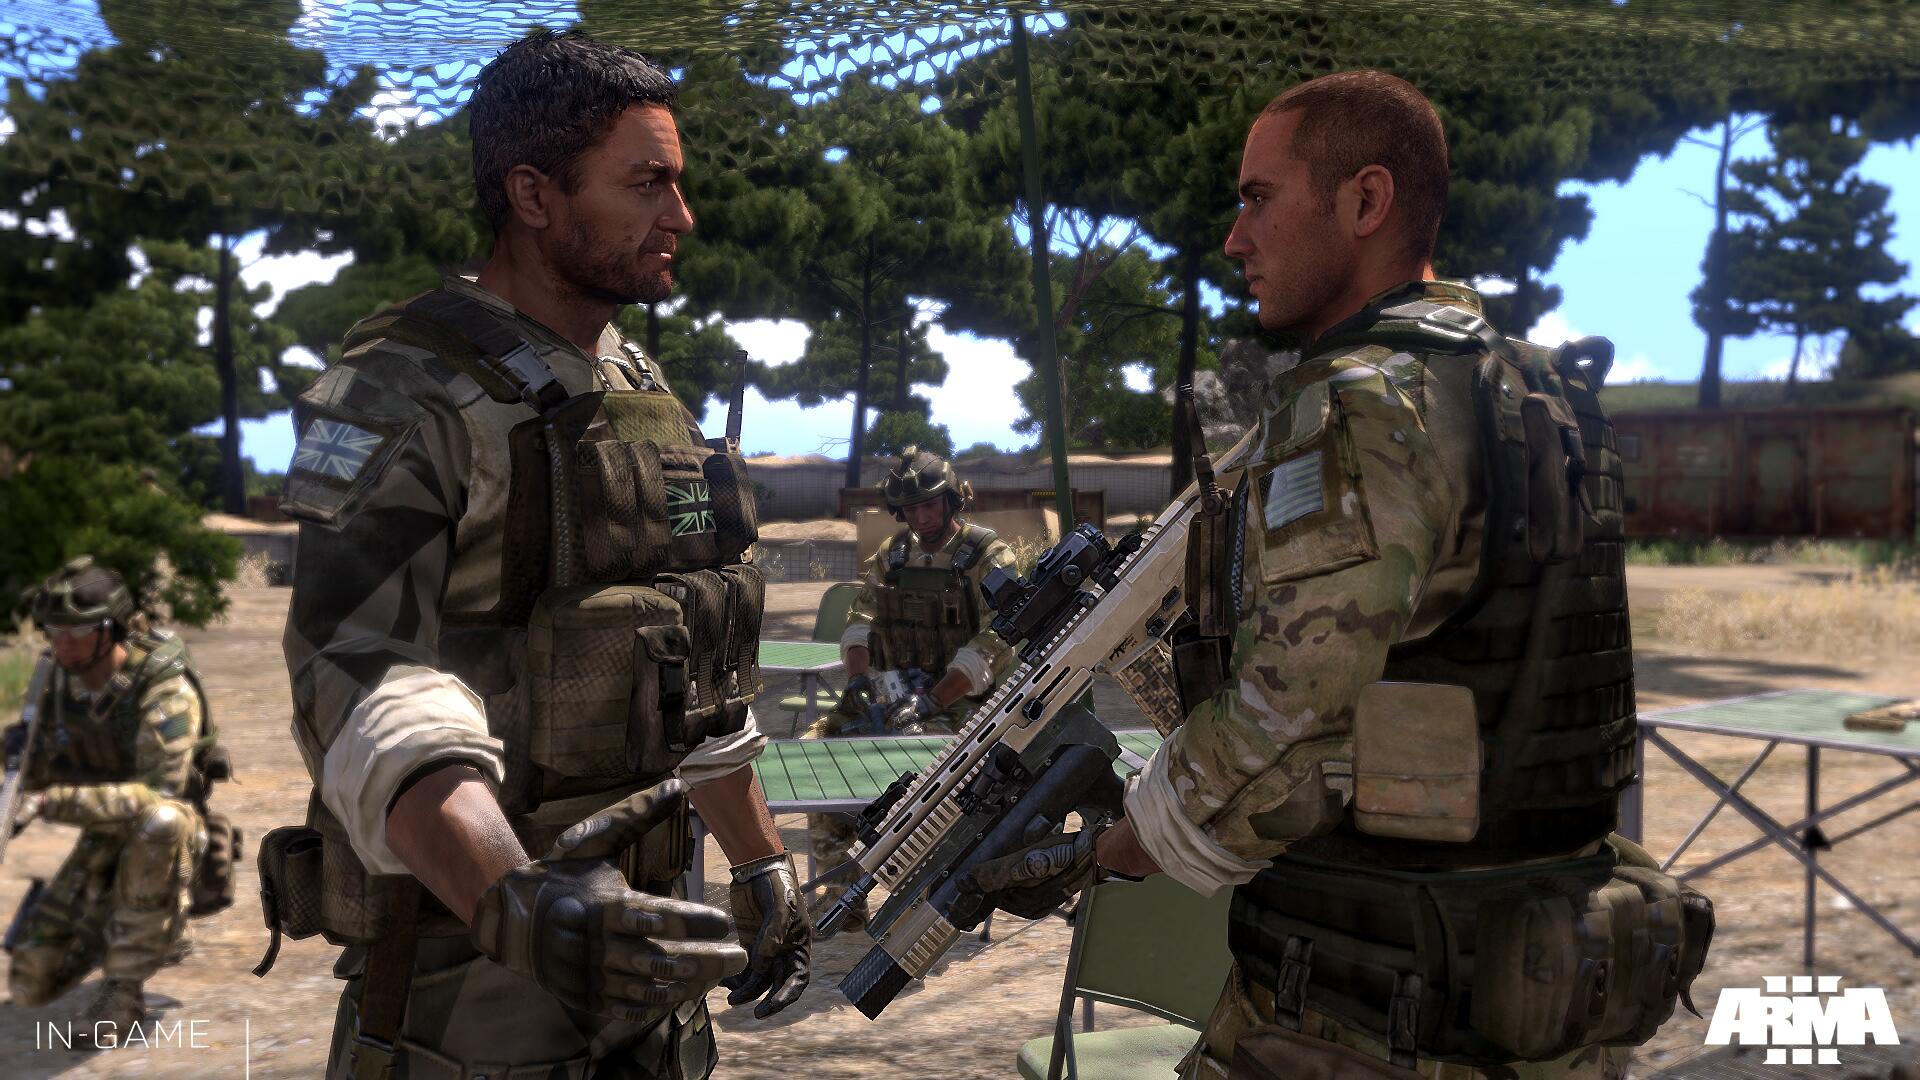 Arma 3 Survive The First Campaign Episode For Arma3 Will Be Available On October 31st Http T Co 5qjpqdojl9 Twitter